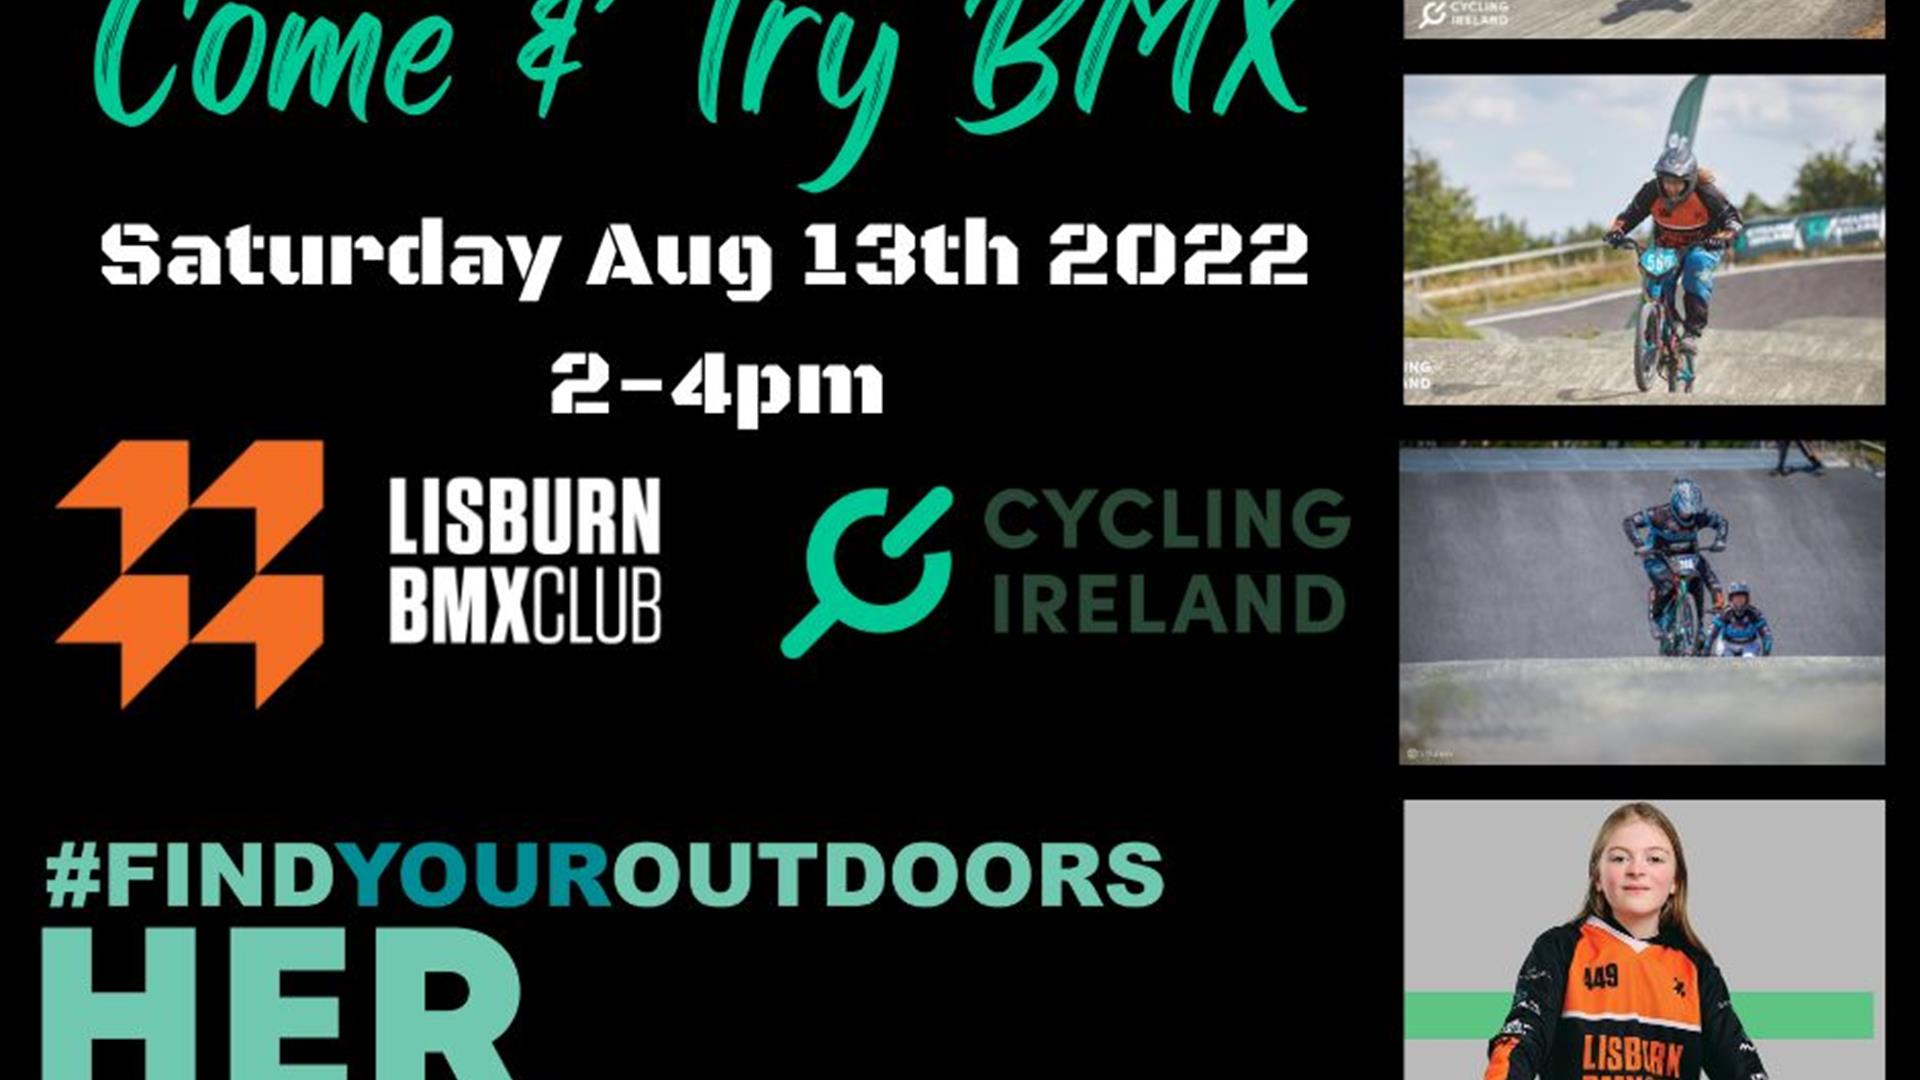 Image is of poster advertising the Ladies & Girls BMX event